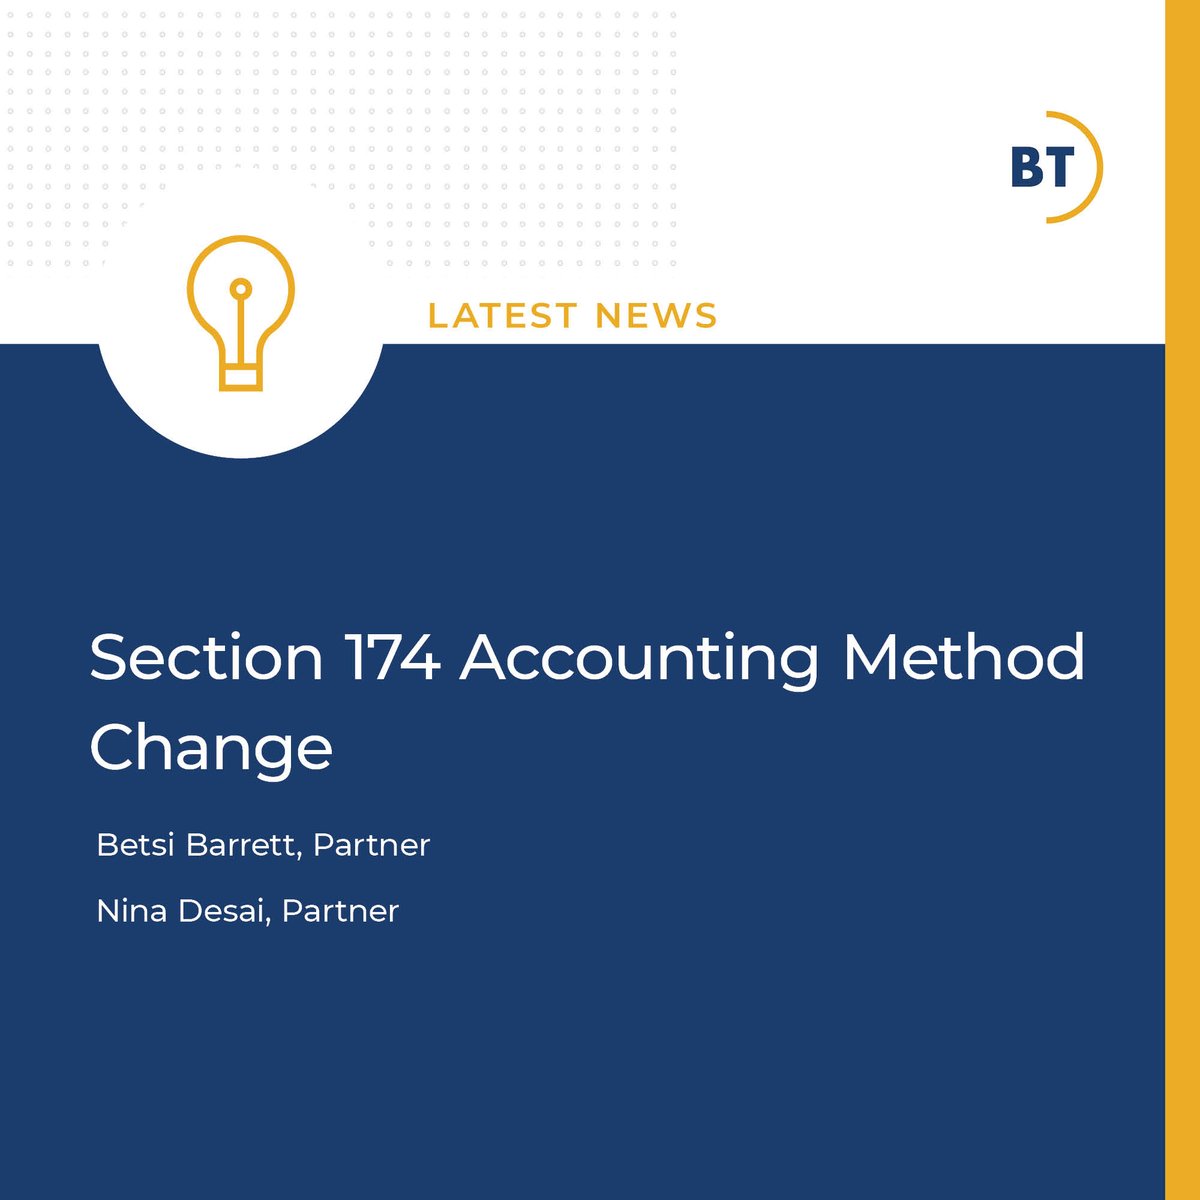 The 2017 TCJA amended Section 174 to require taxpayers to capitalize and amortize specified R&E expenditures over a period of 5 years for domestic expenses and 15 years for foreign expenses. Learn about the changes taking effect this year: hubs.la/Q01BHplS0